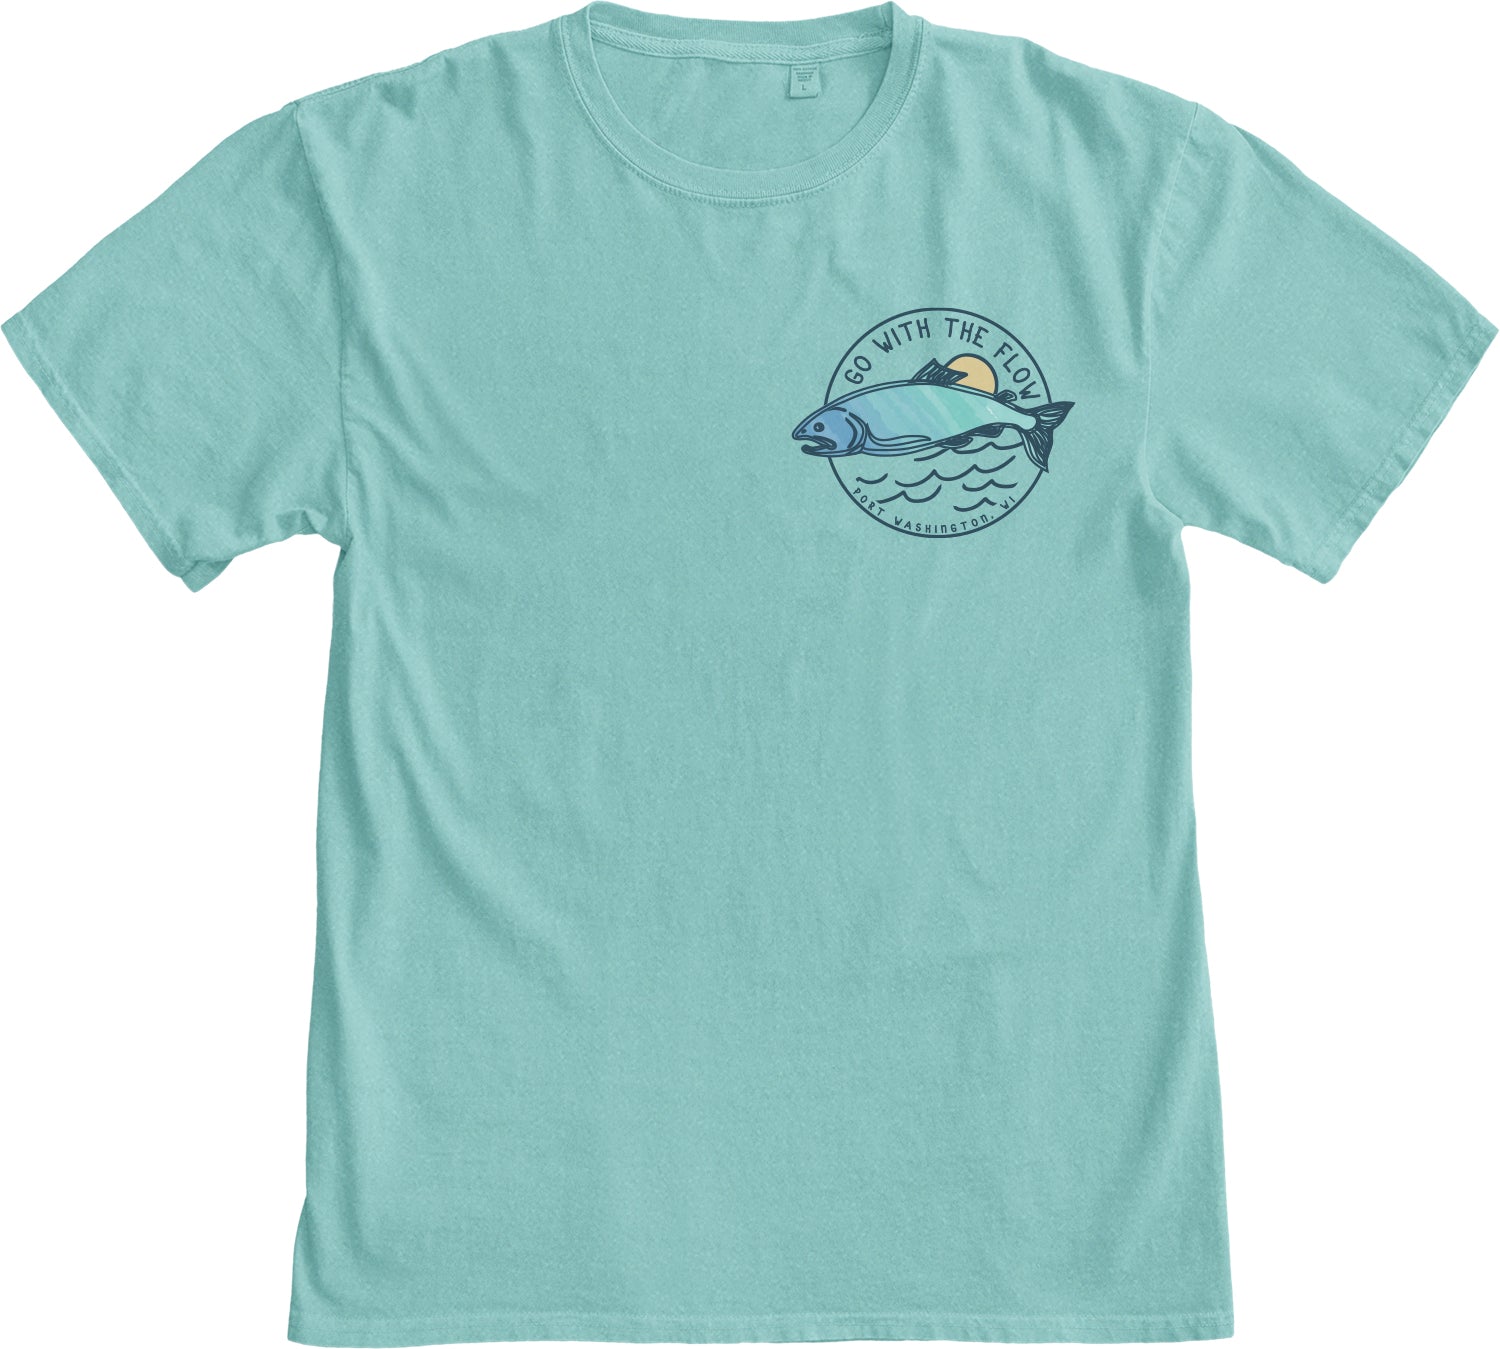 Go with the Flow T-Shirt